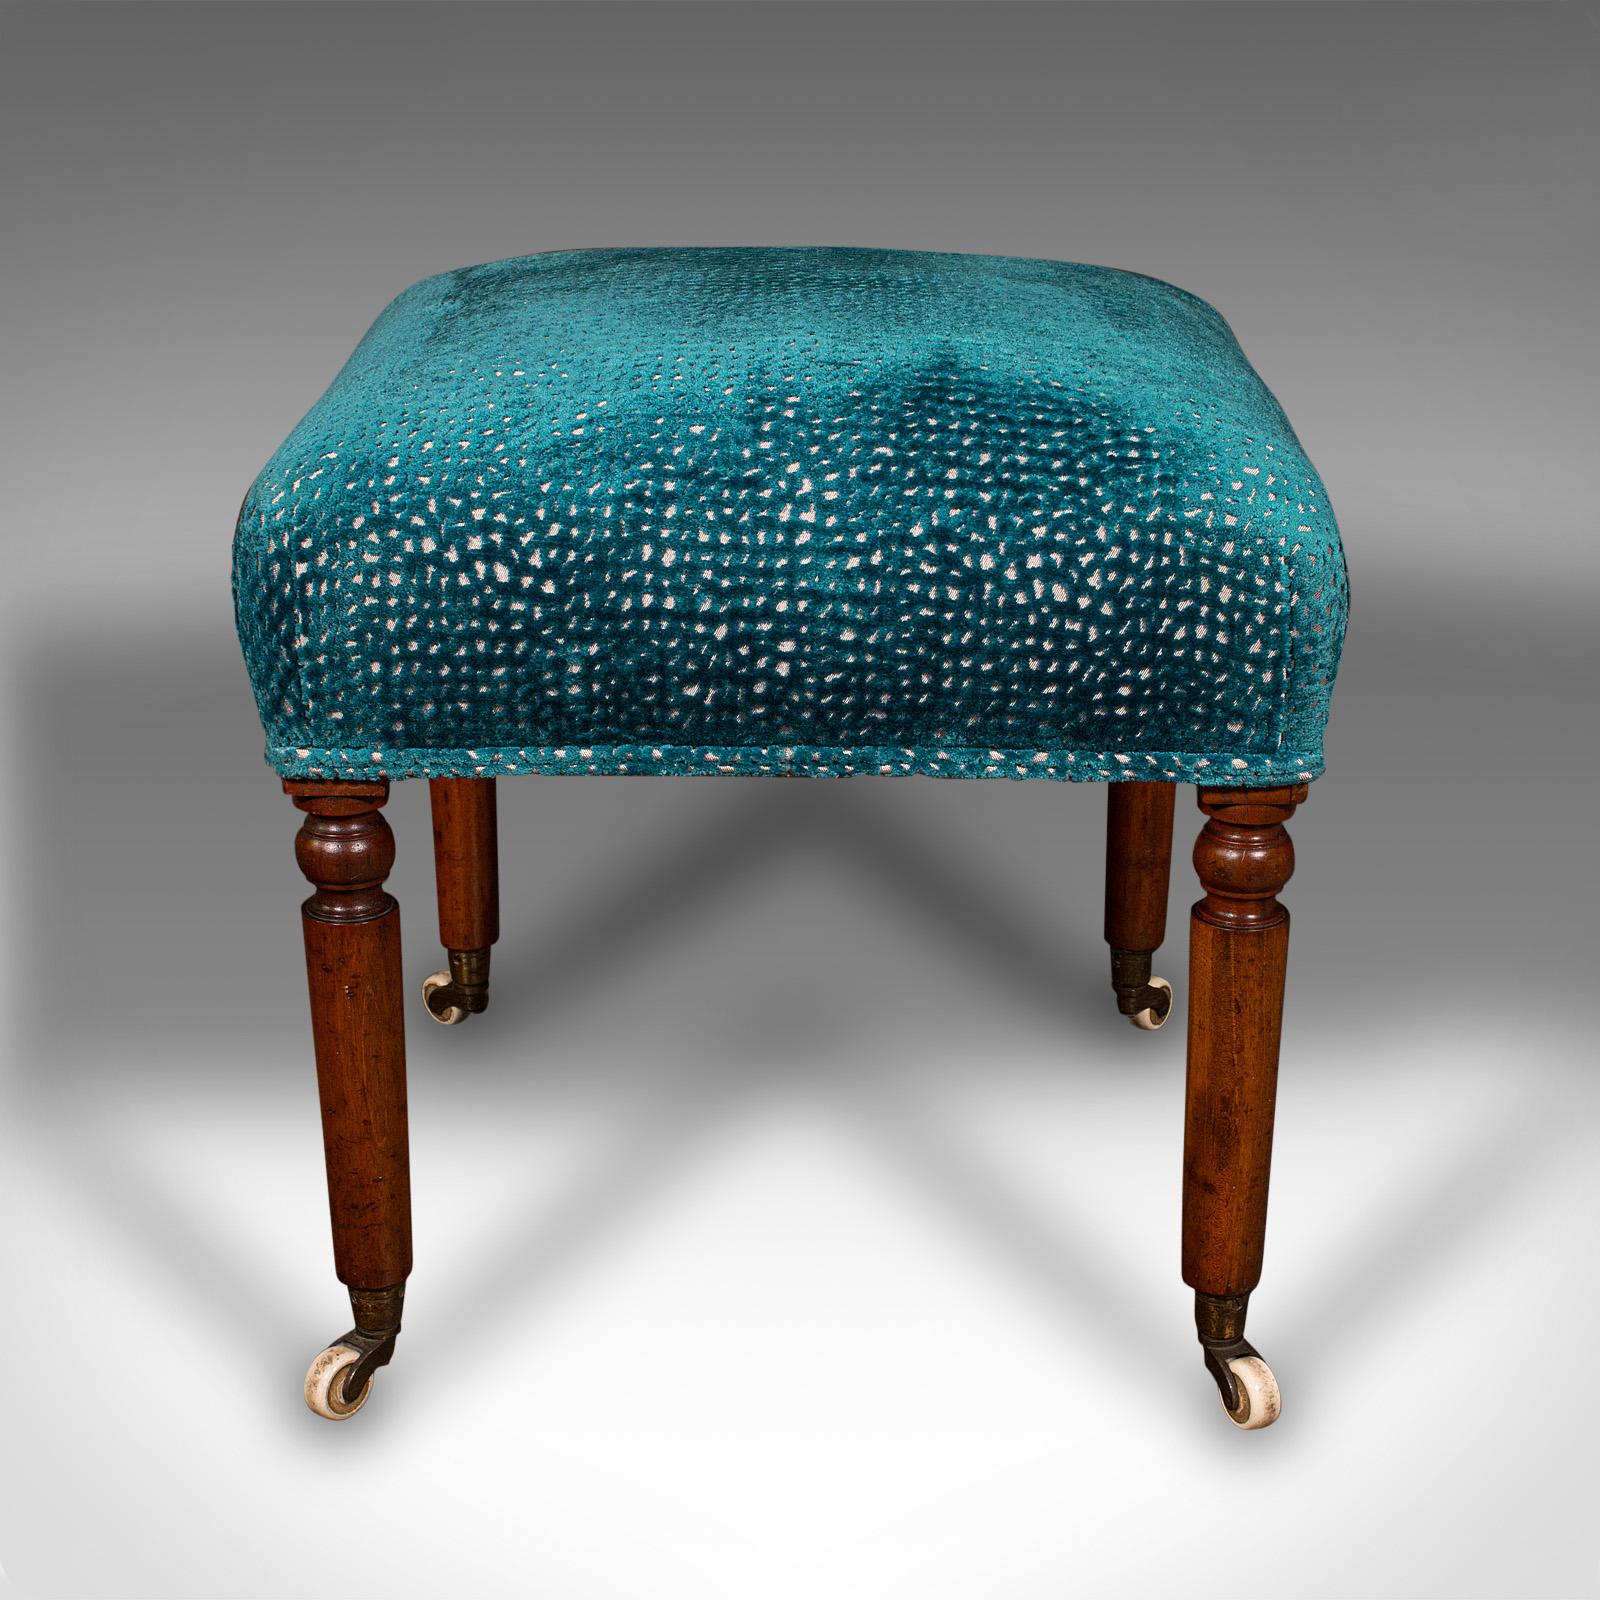 British Antique Dressing Stool, English, Chenille Upholstery, Footstool, Regency, C.1820 For Sale